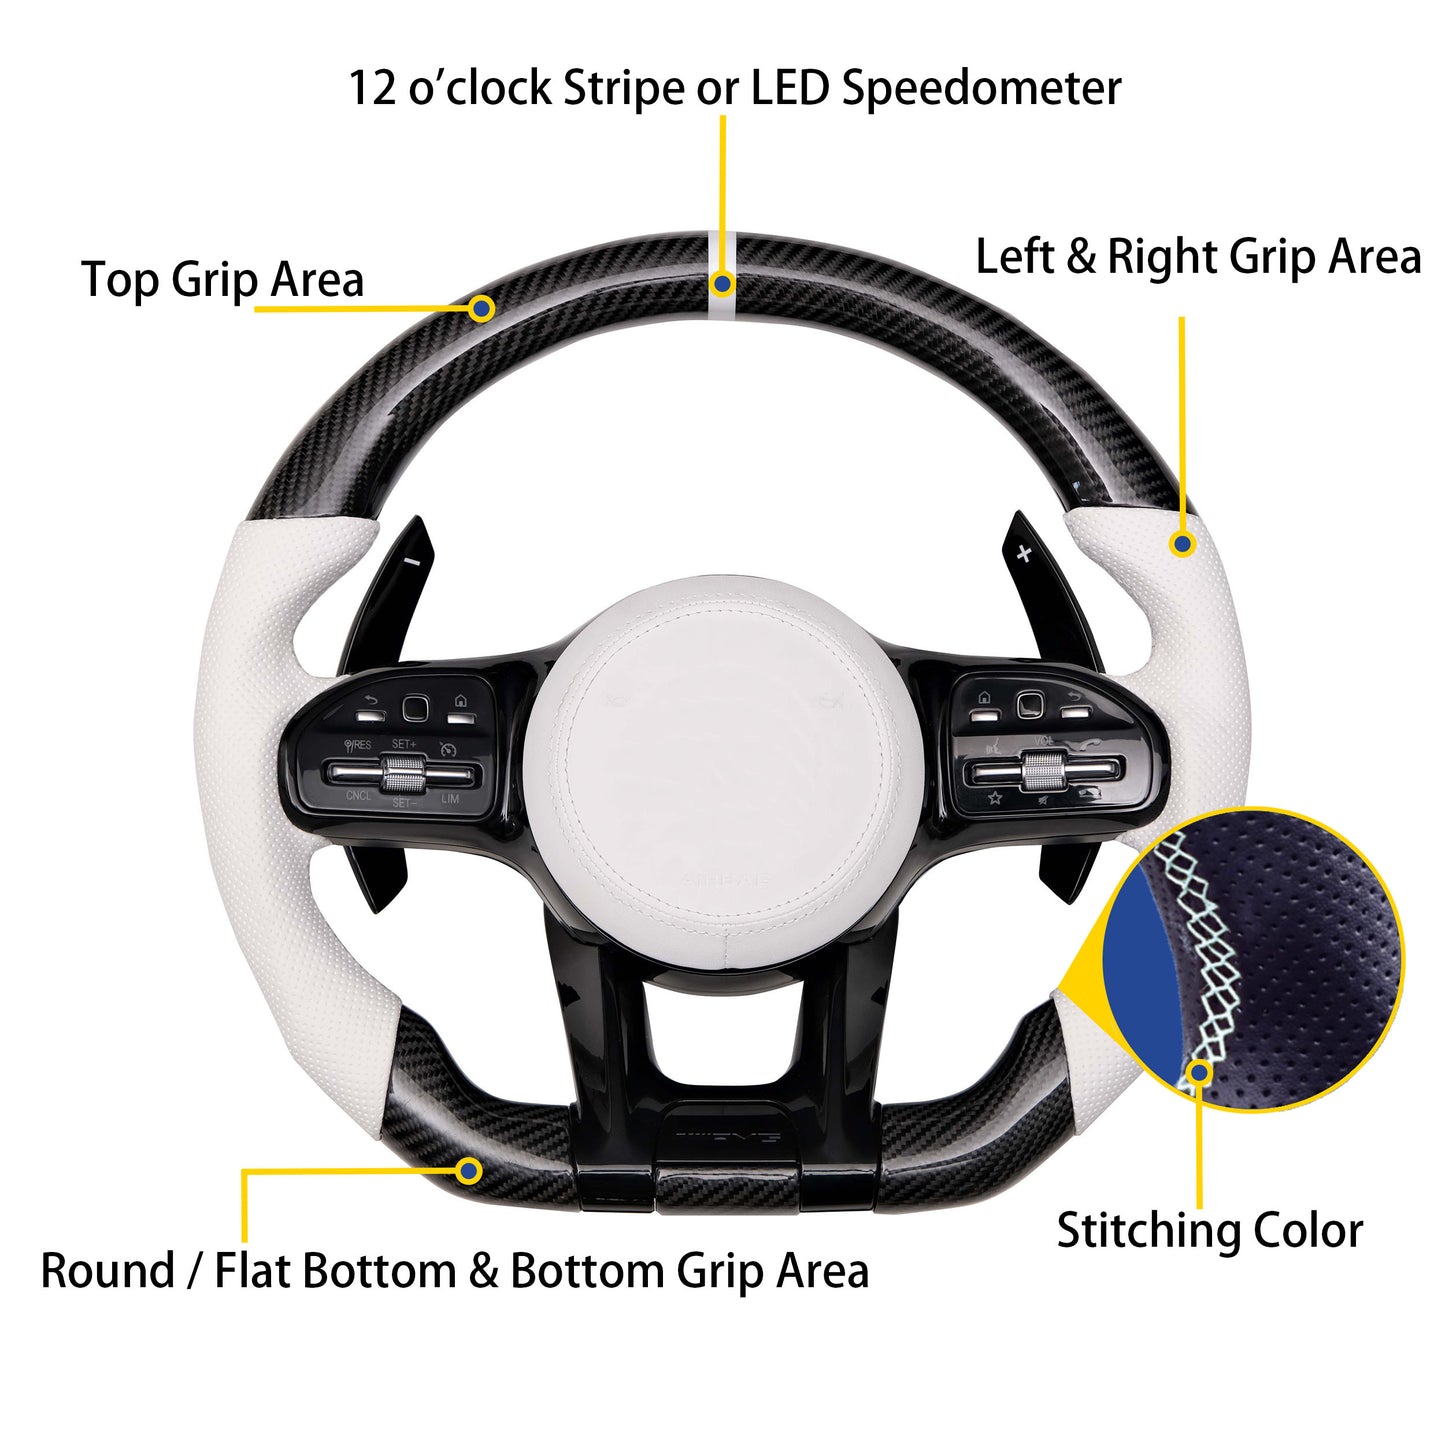 Customized - Carbon Fiber Steering Wheel for 2011-2013 JEEP Grand Cherokee